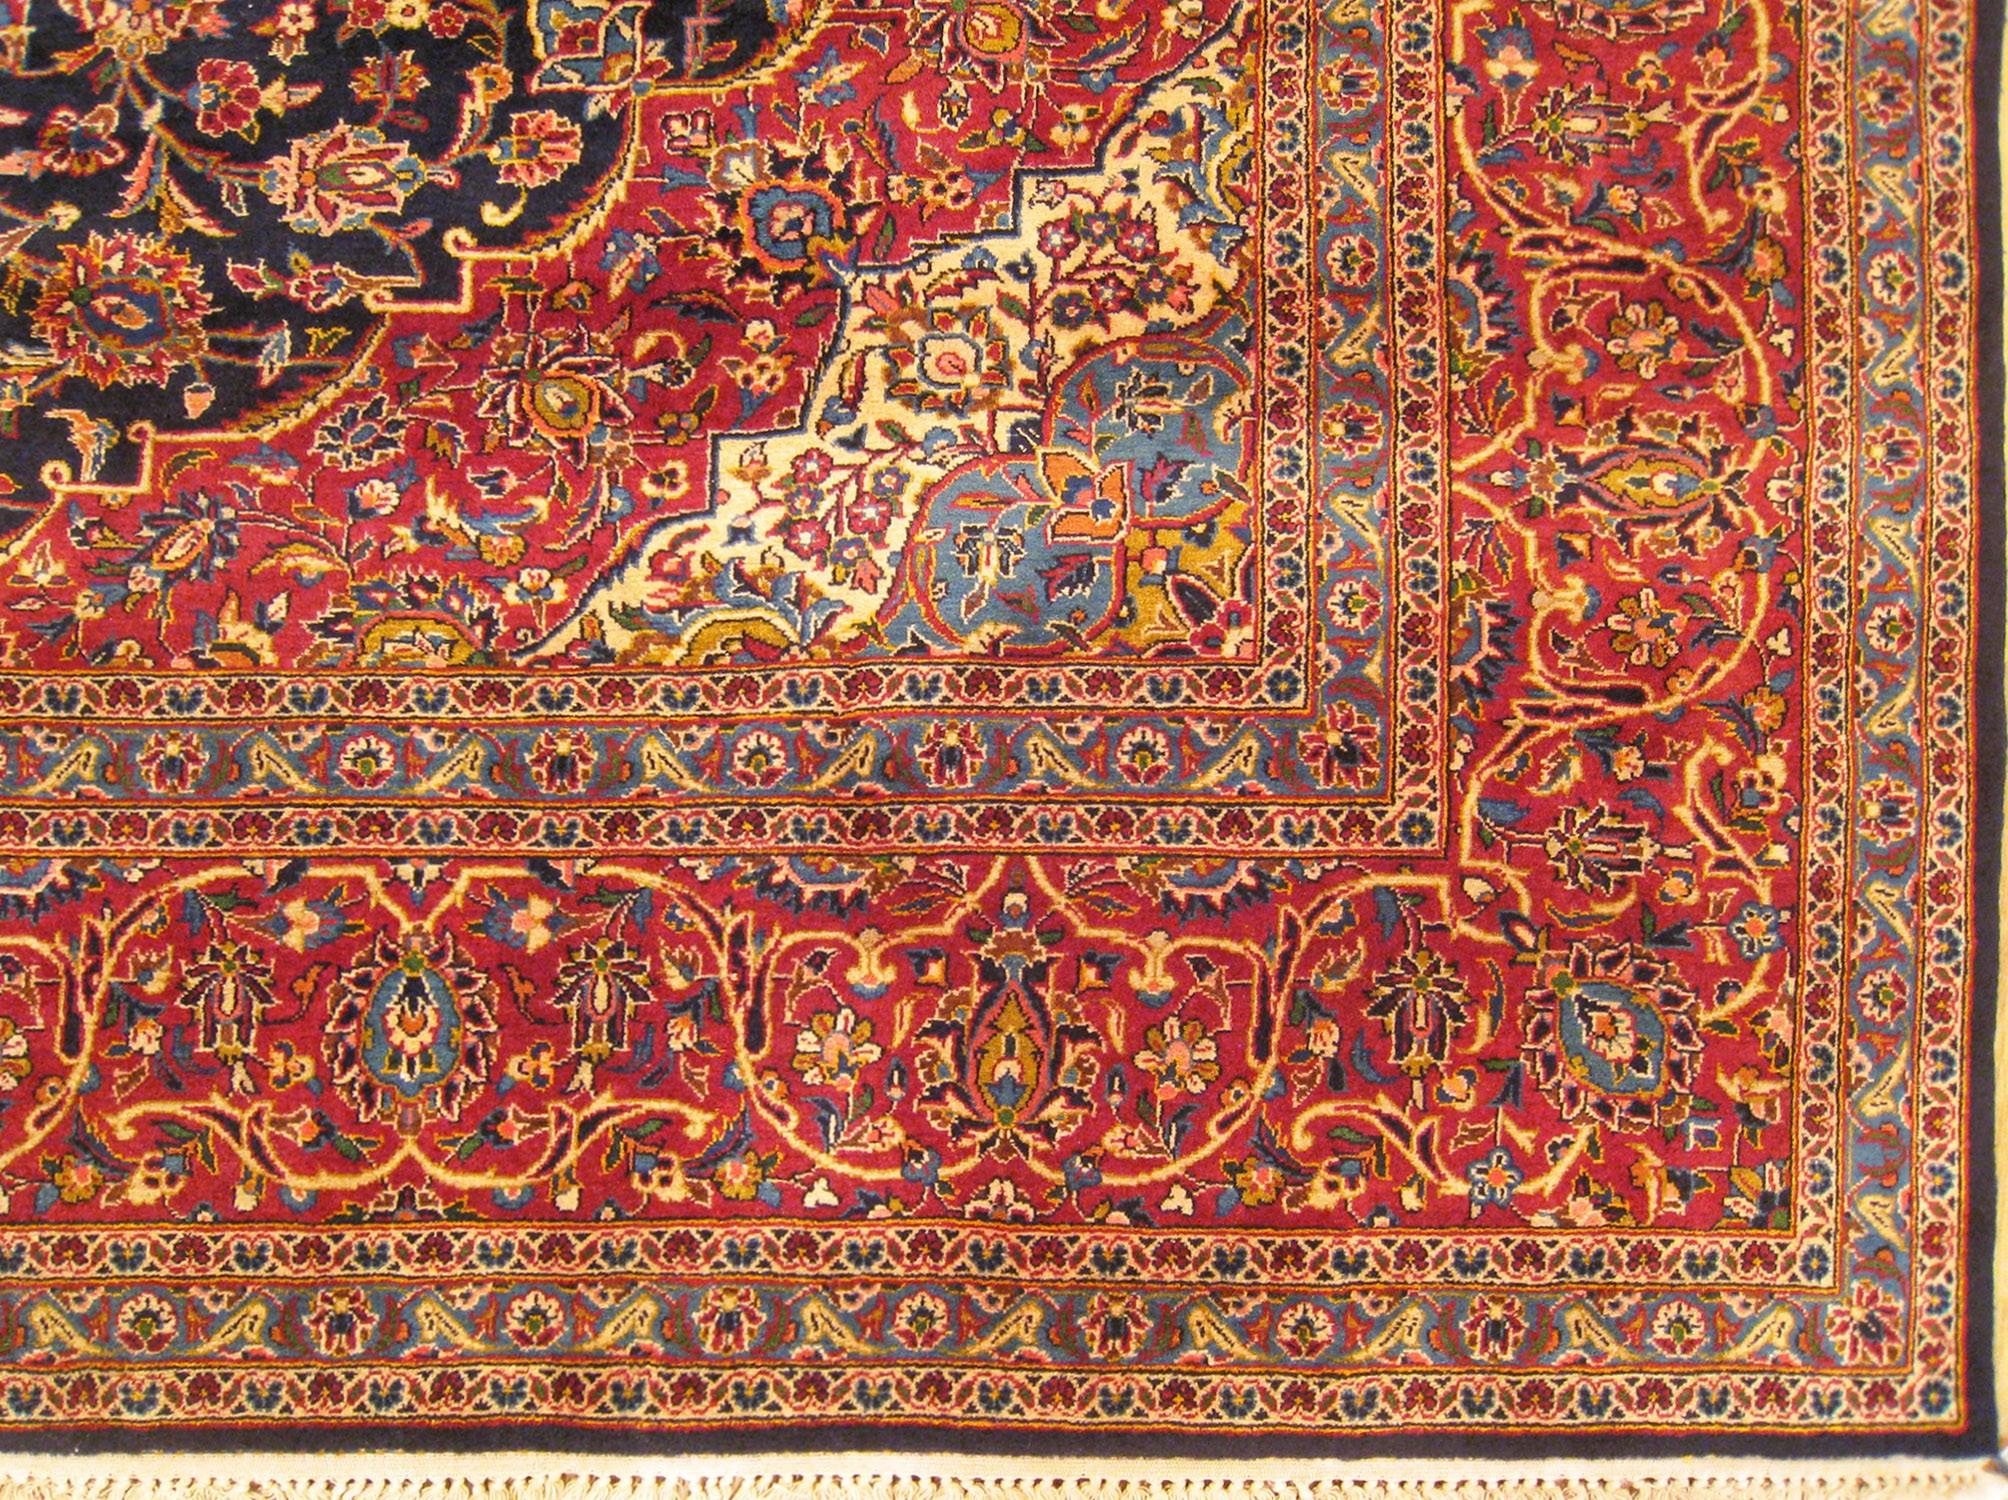 Mid-20th Century Vintage Persian Kashan Oriental Carpet, in Room size, with Central Medallion